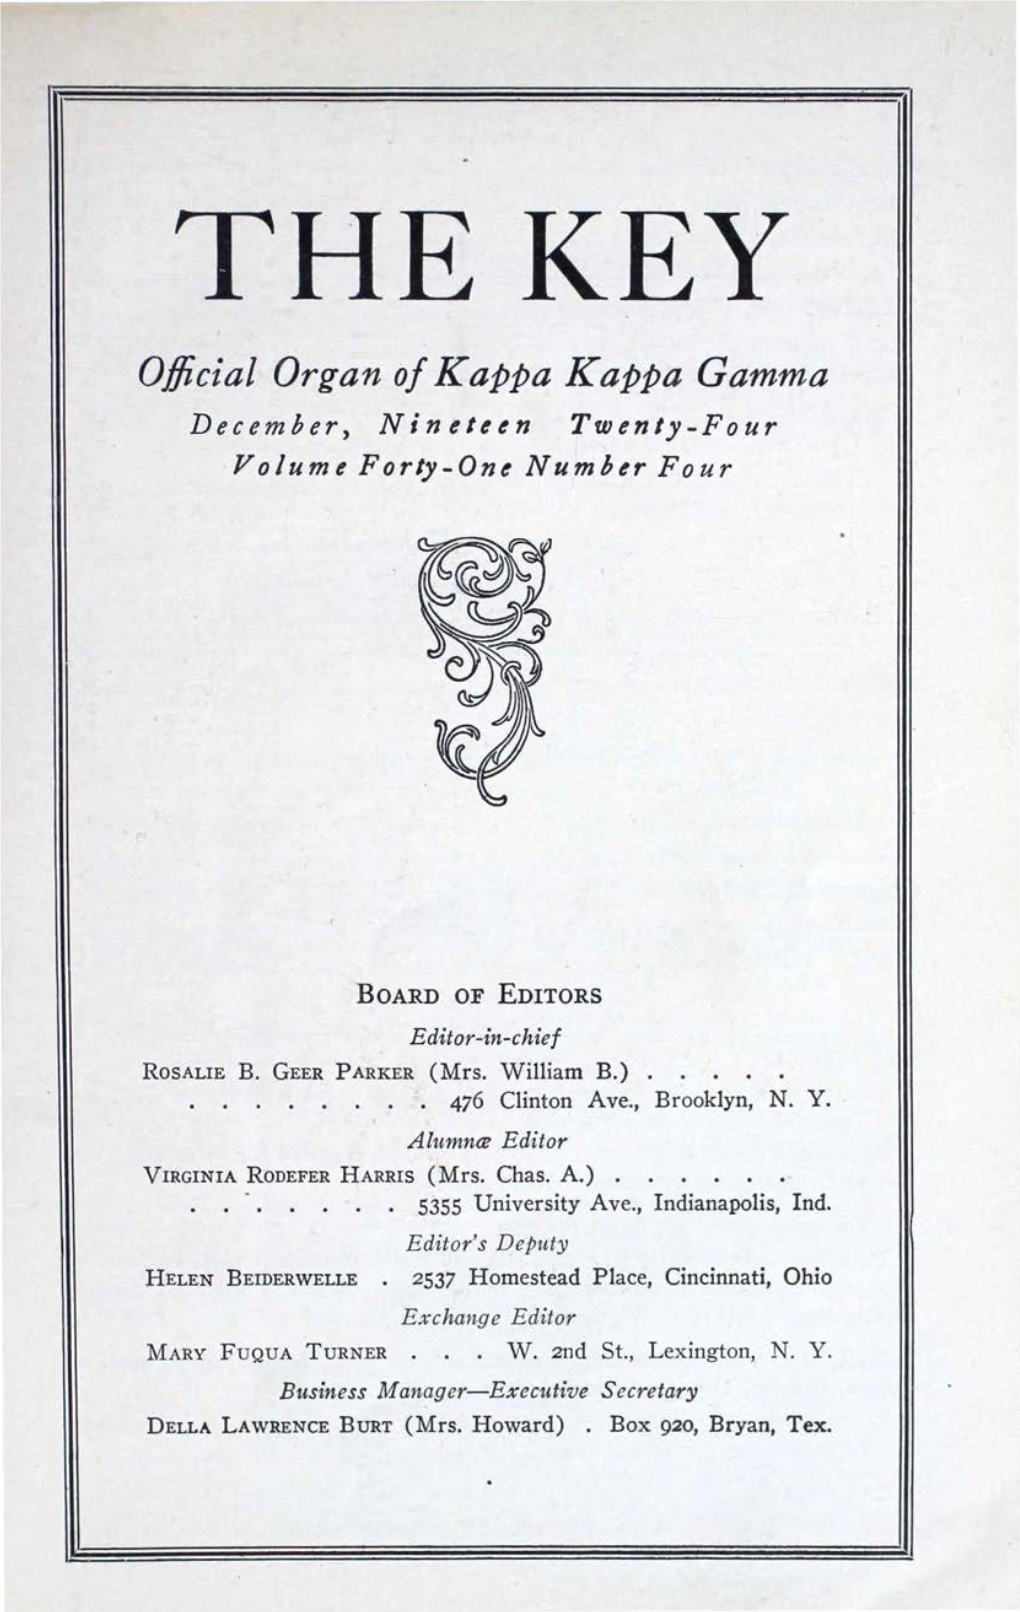 THE KEY Official Organ of Kappa Kappa Gamma December, Nineteen Twenty-Four Volume Forty-One Number Four